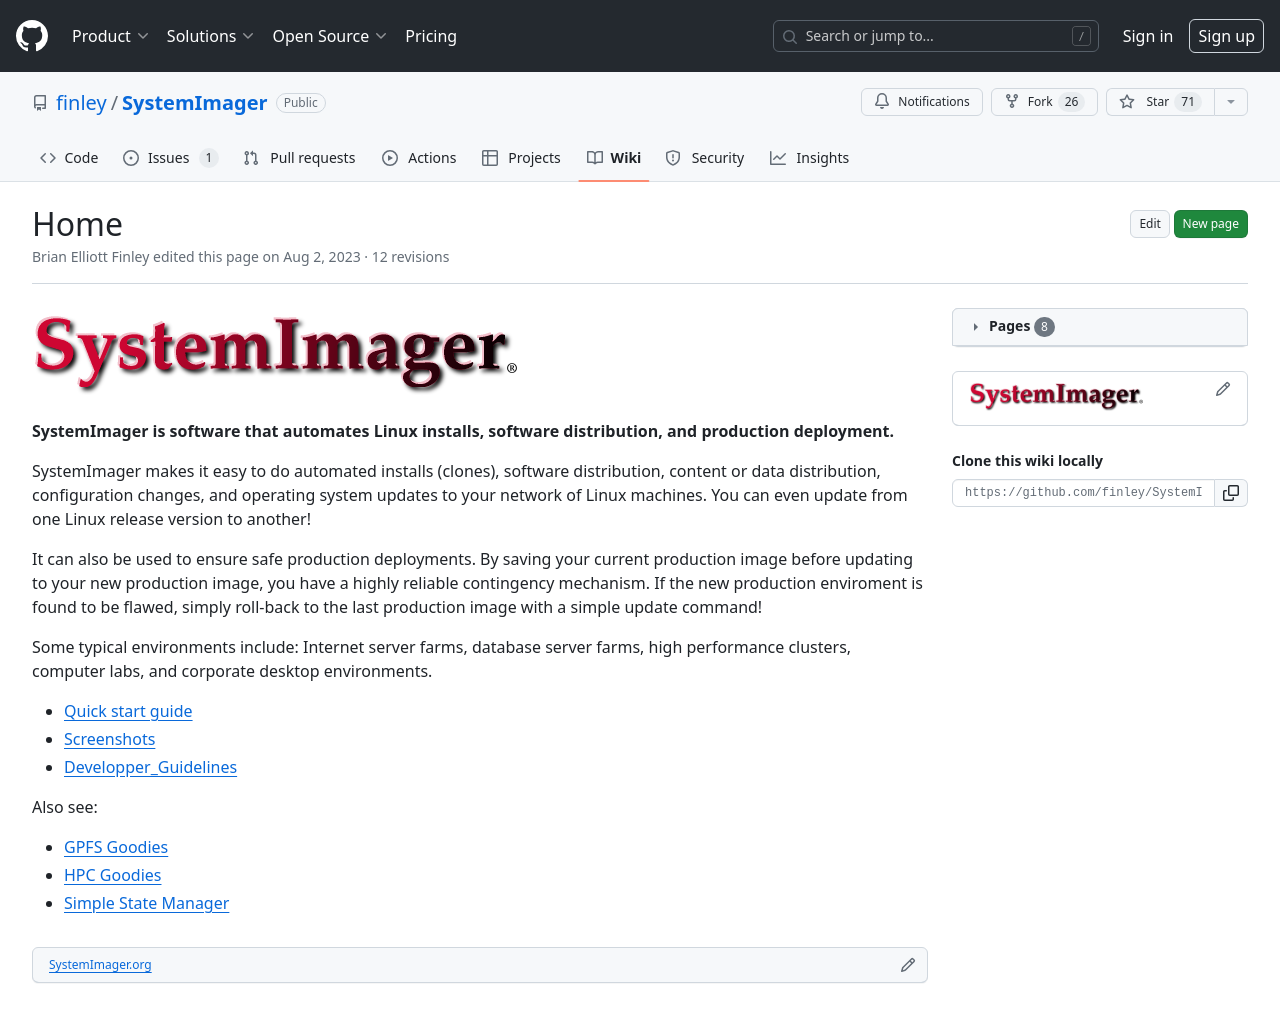 systemimager.org